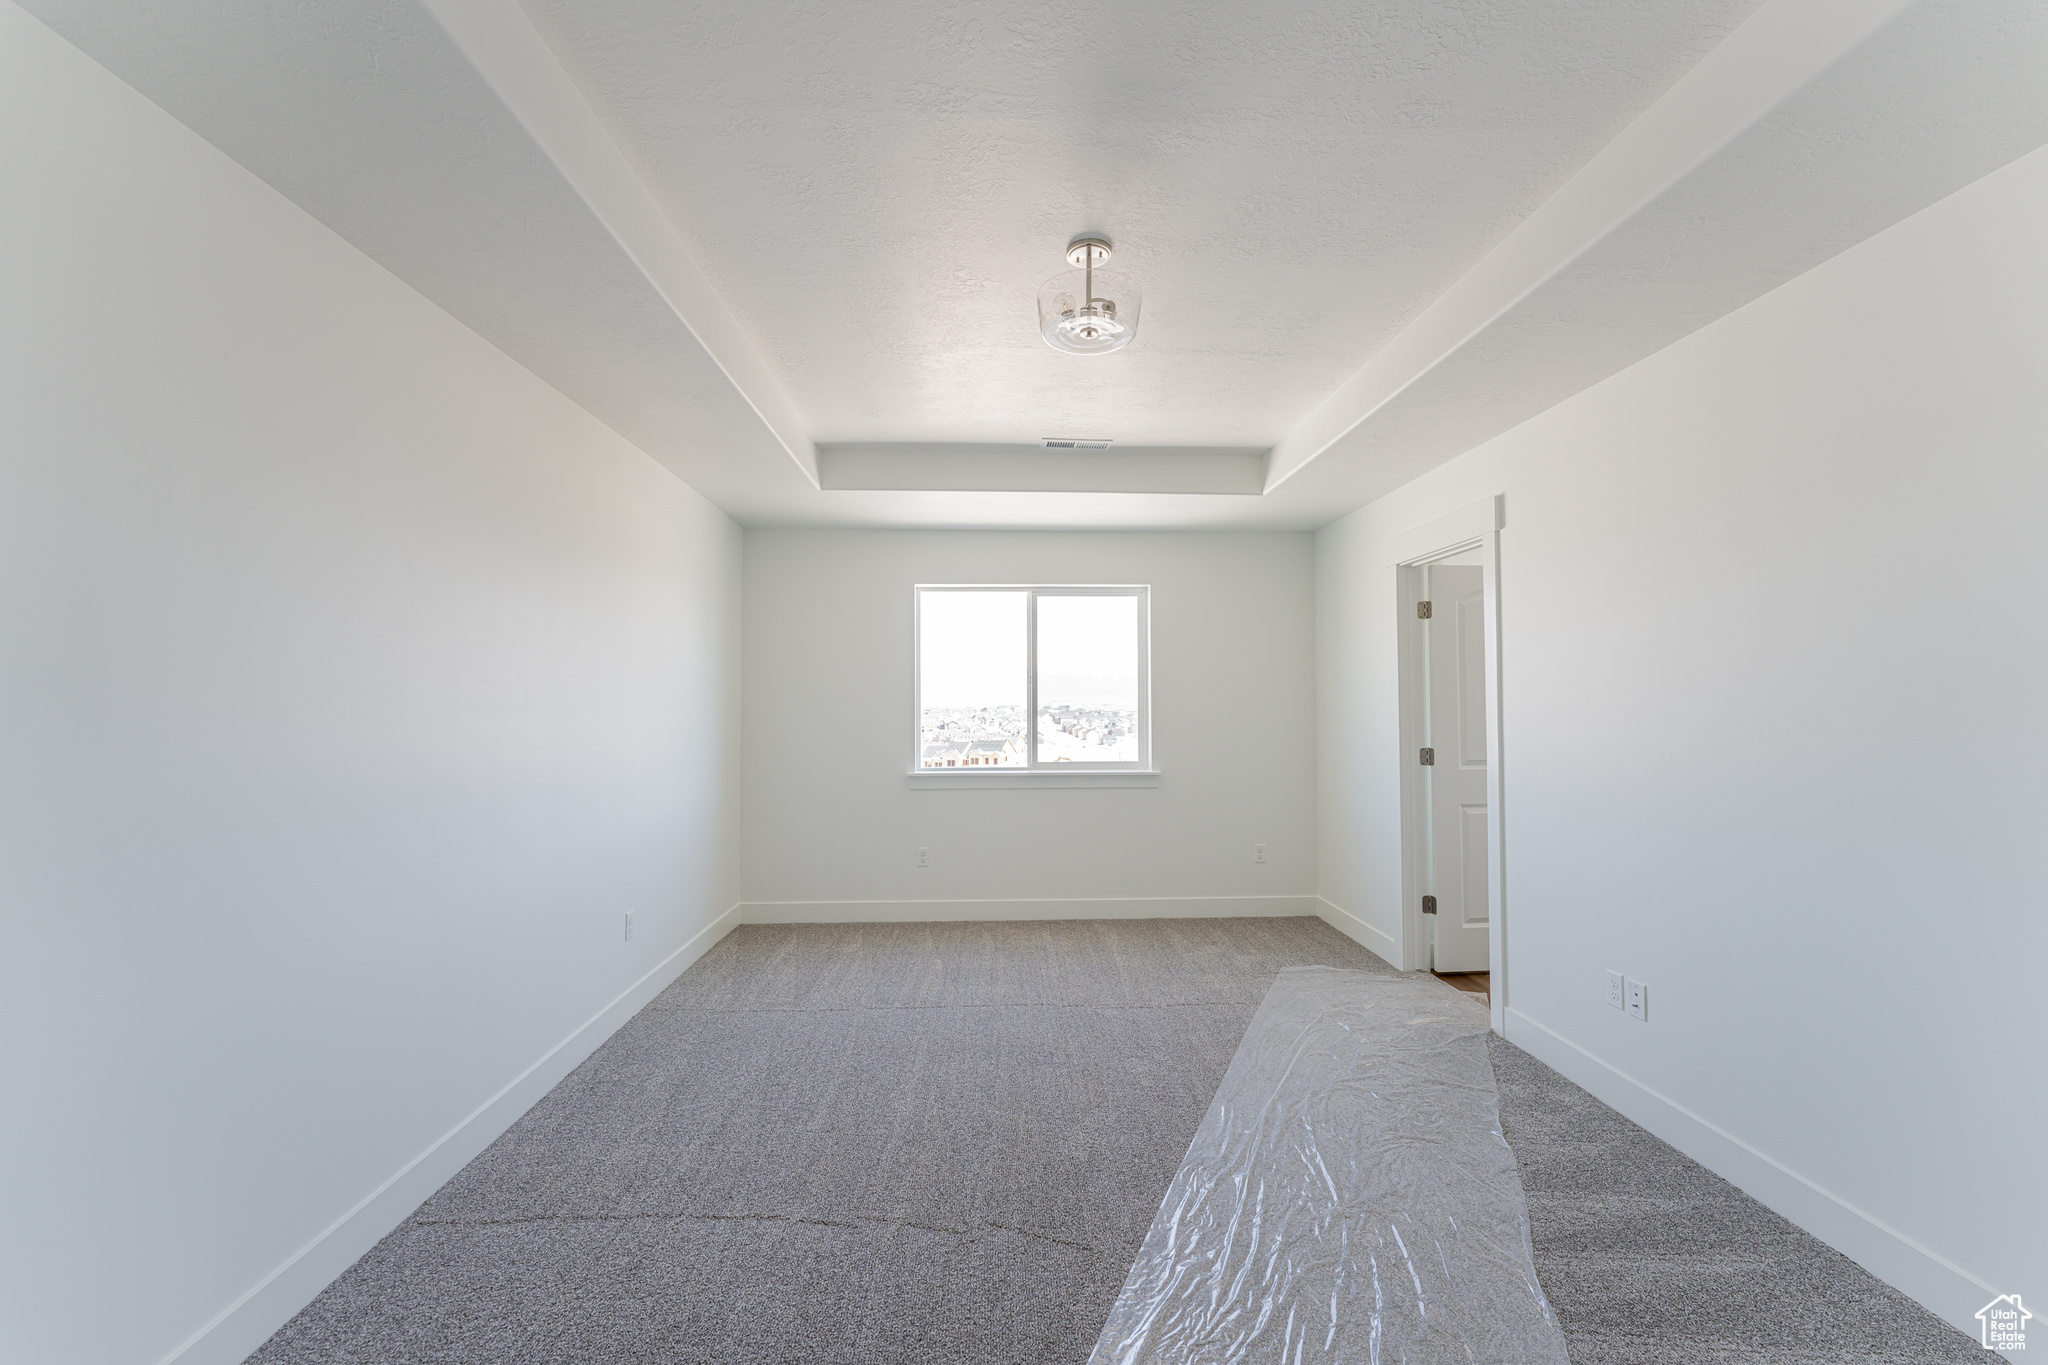 Empty room with light colored carpet and a raised ceiling